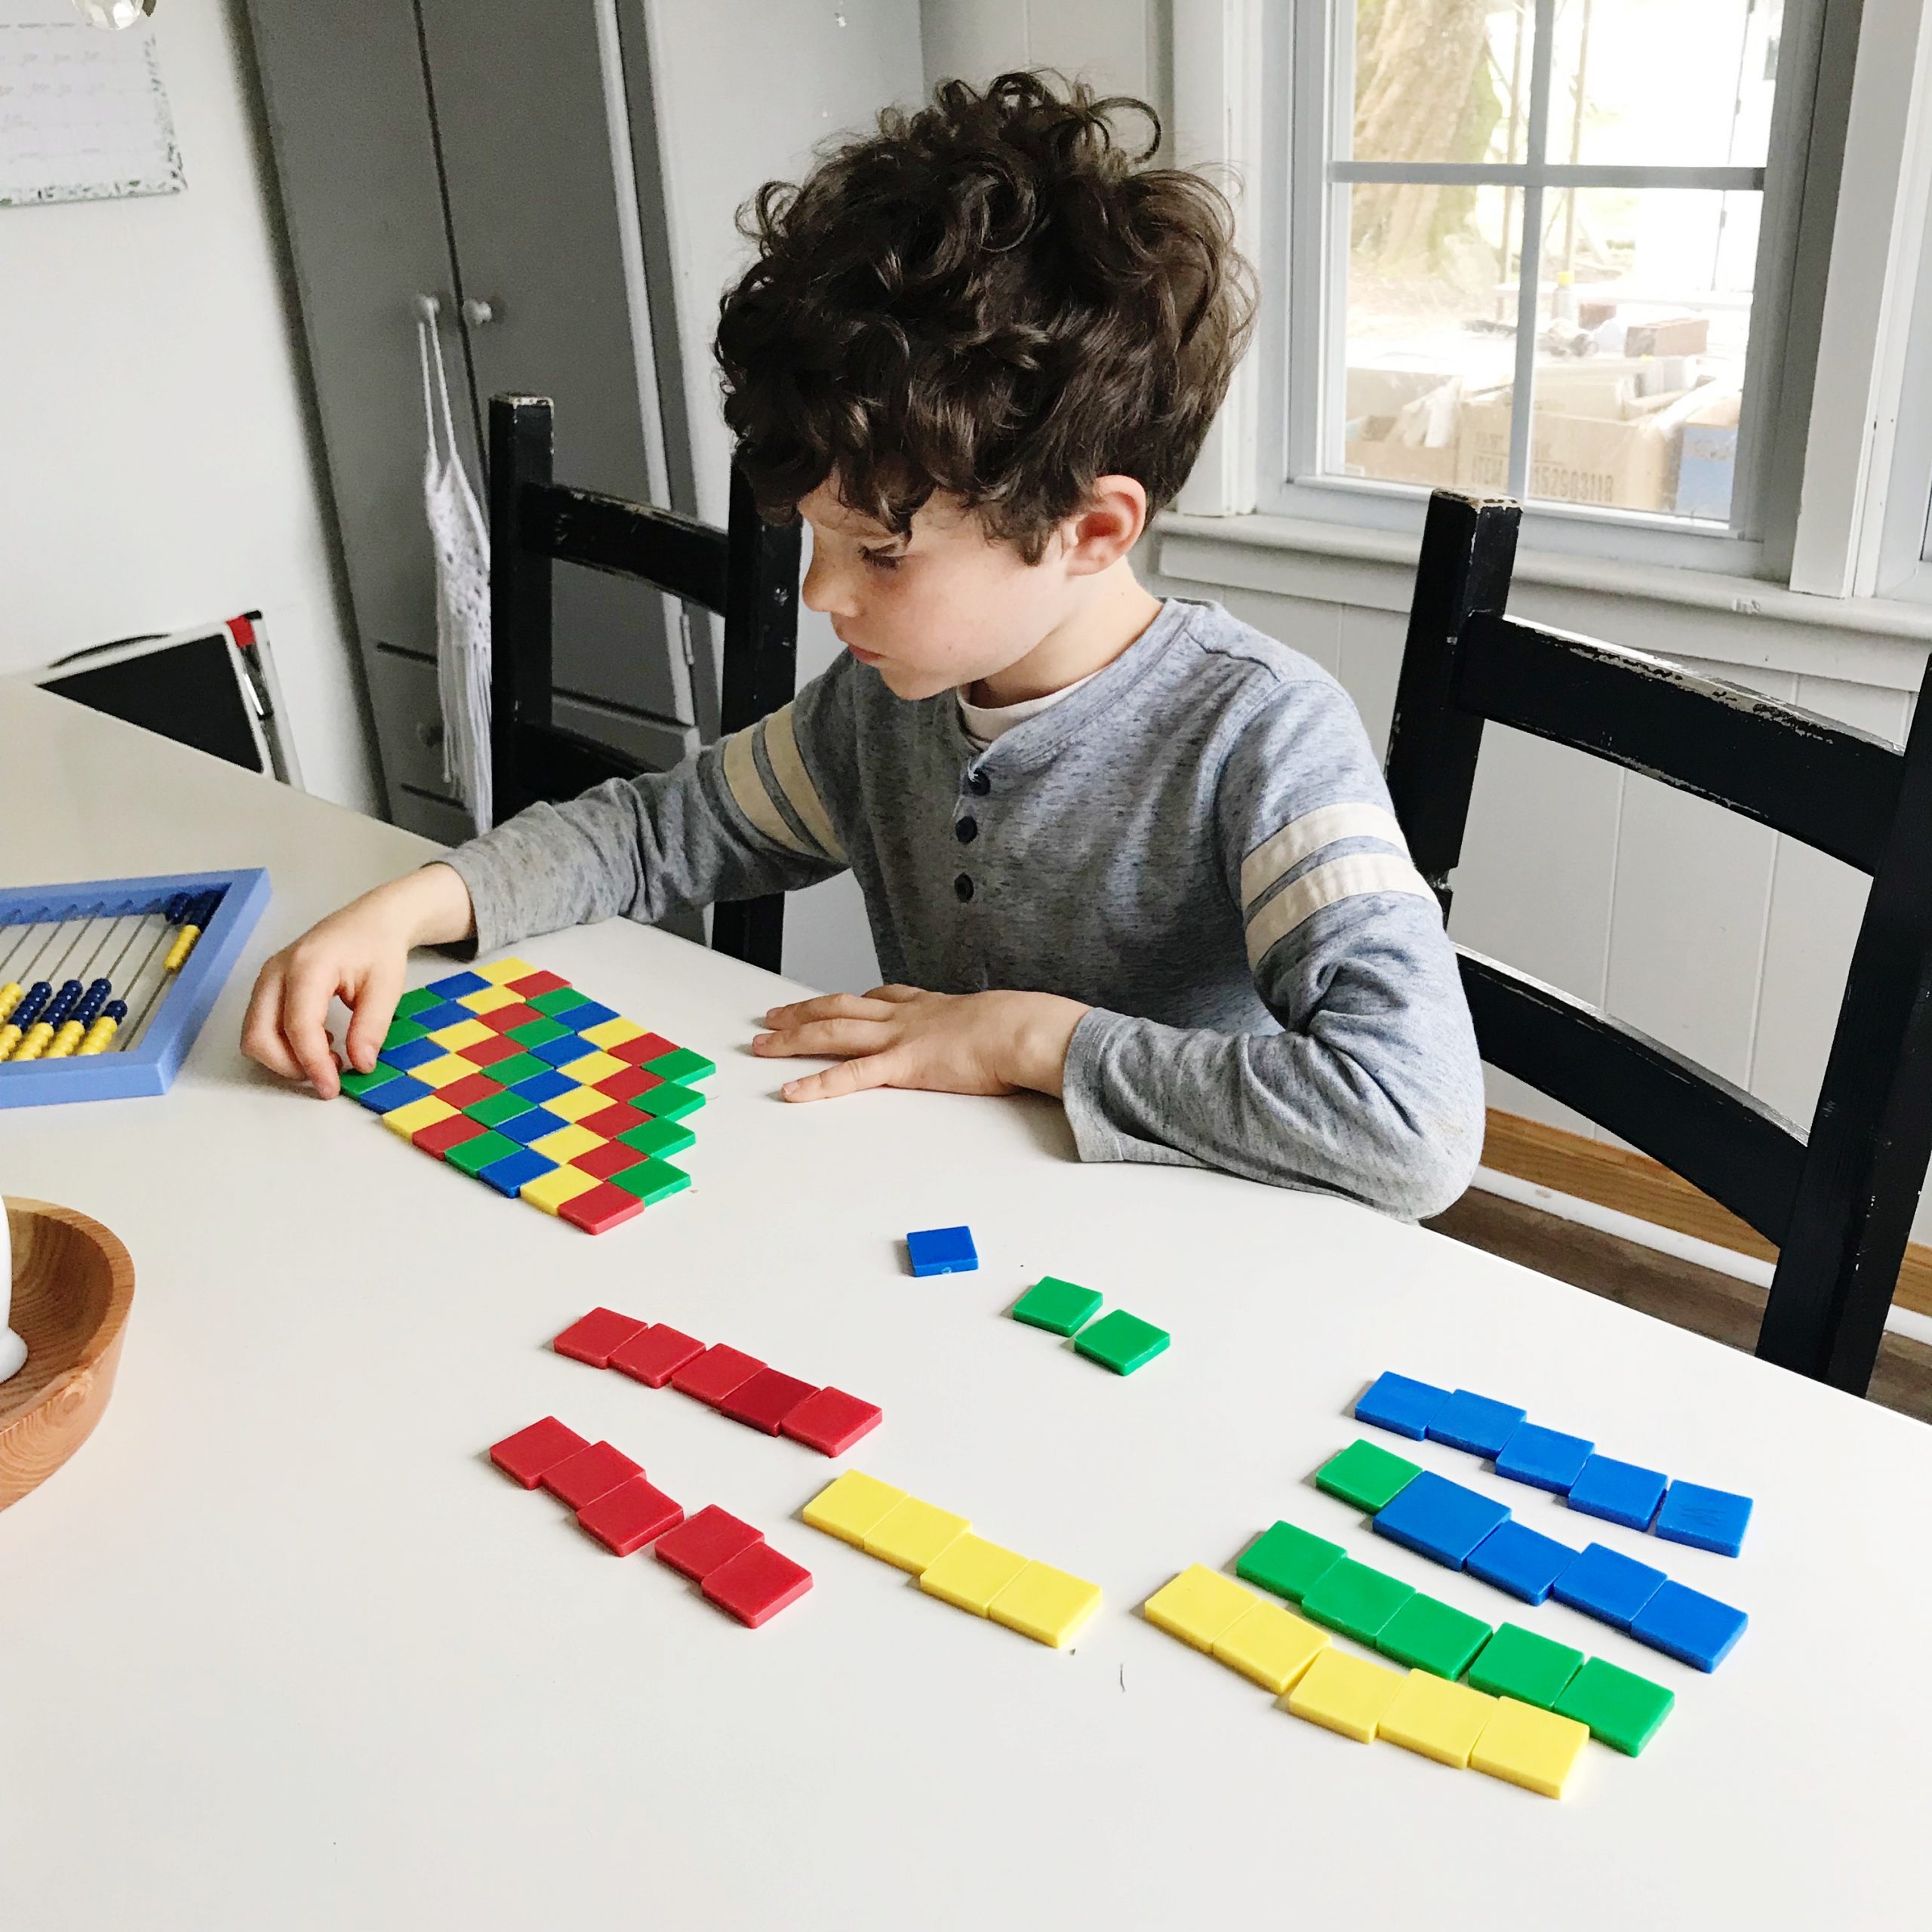 child playing with shapes at table